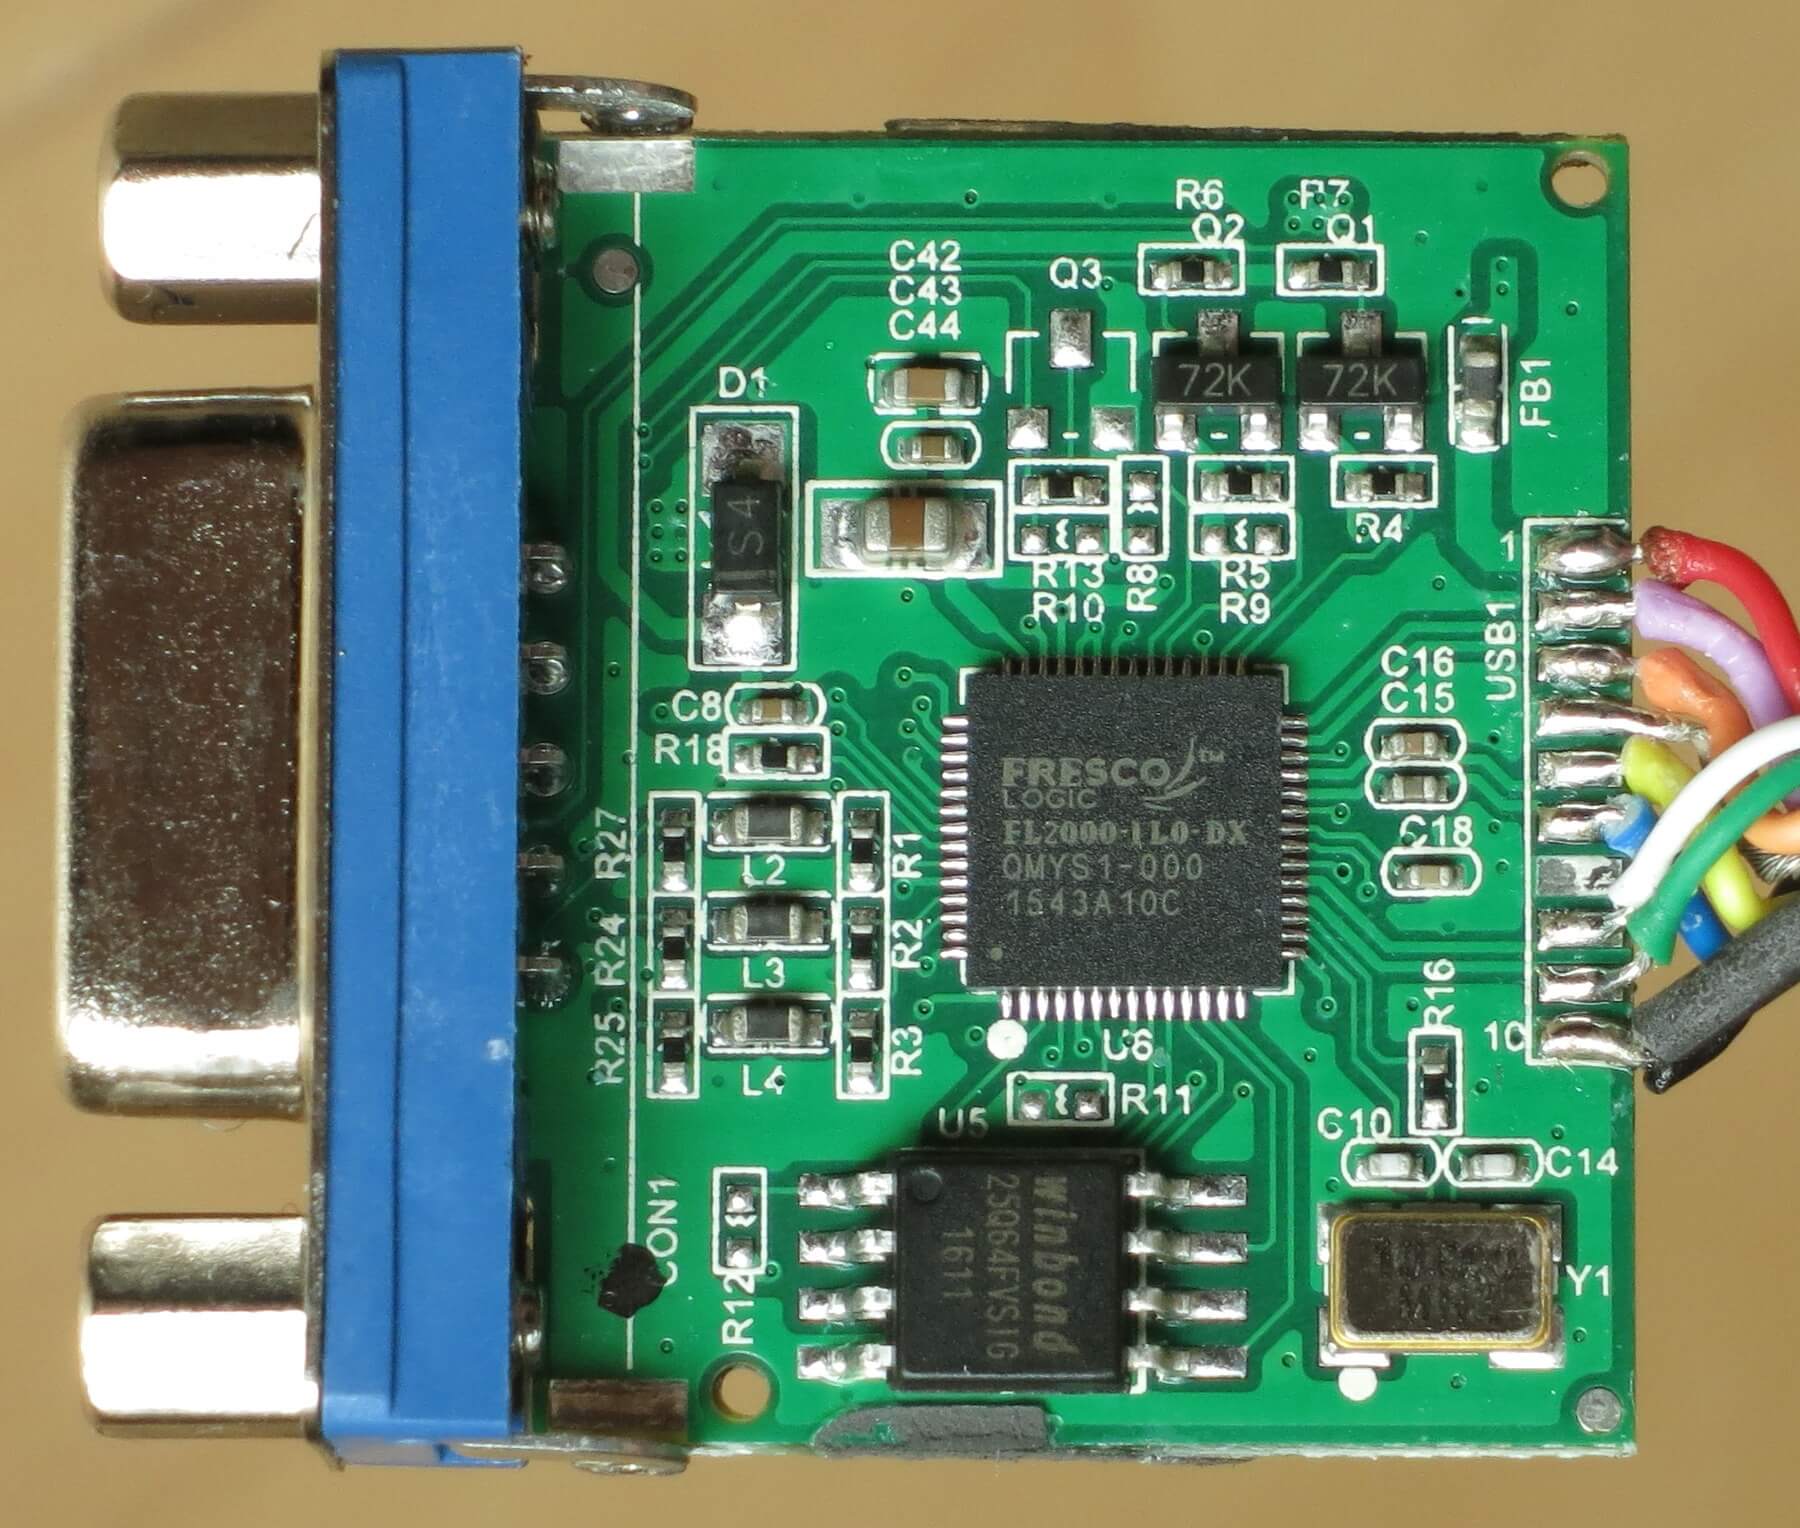 Osmo-FL2K: A TX-Only SDR Hacked From Commodity $5 USB to VGA Adapters – Demos Available for Transmitting WBFM, GSM, UMTS,